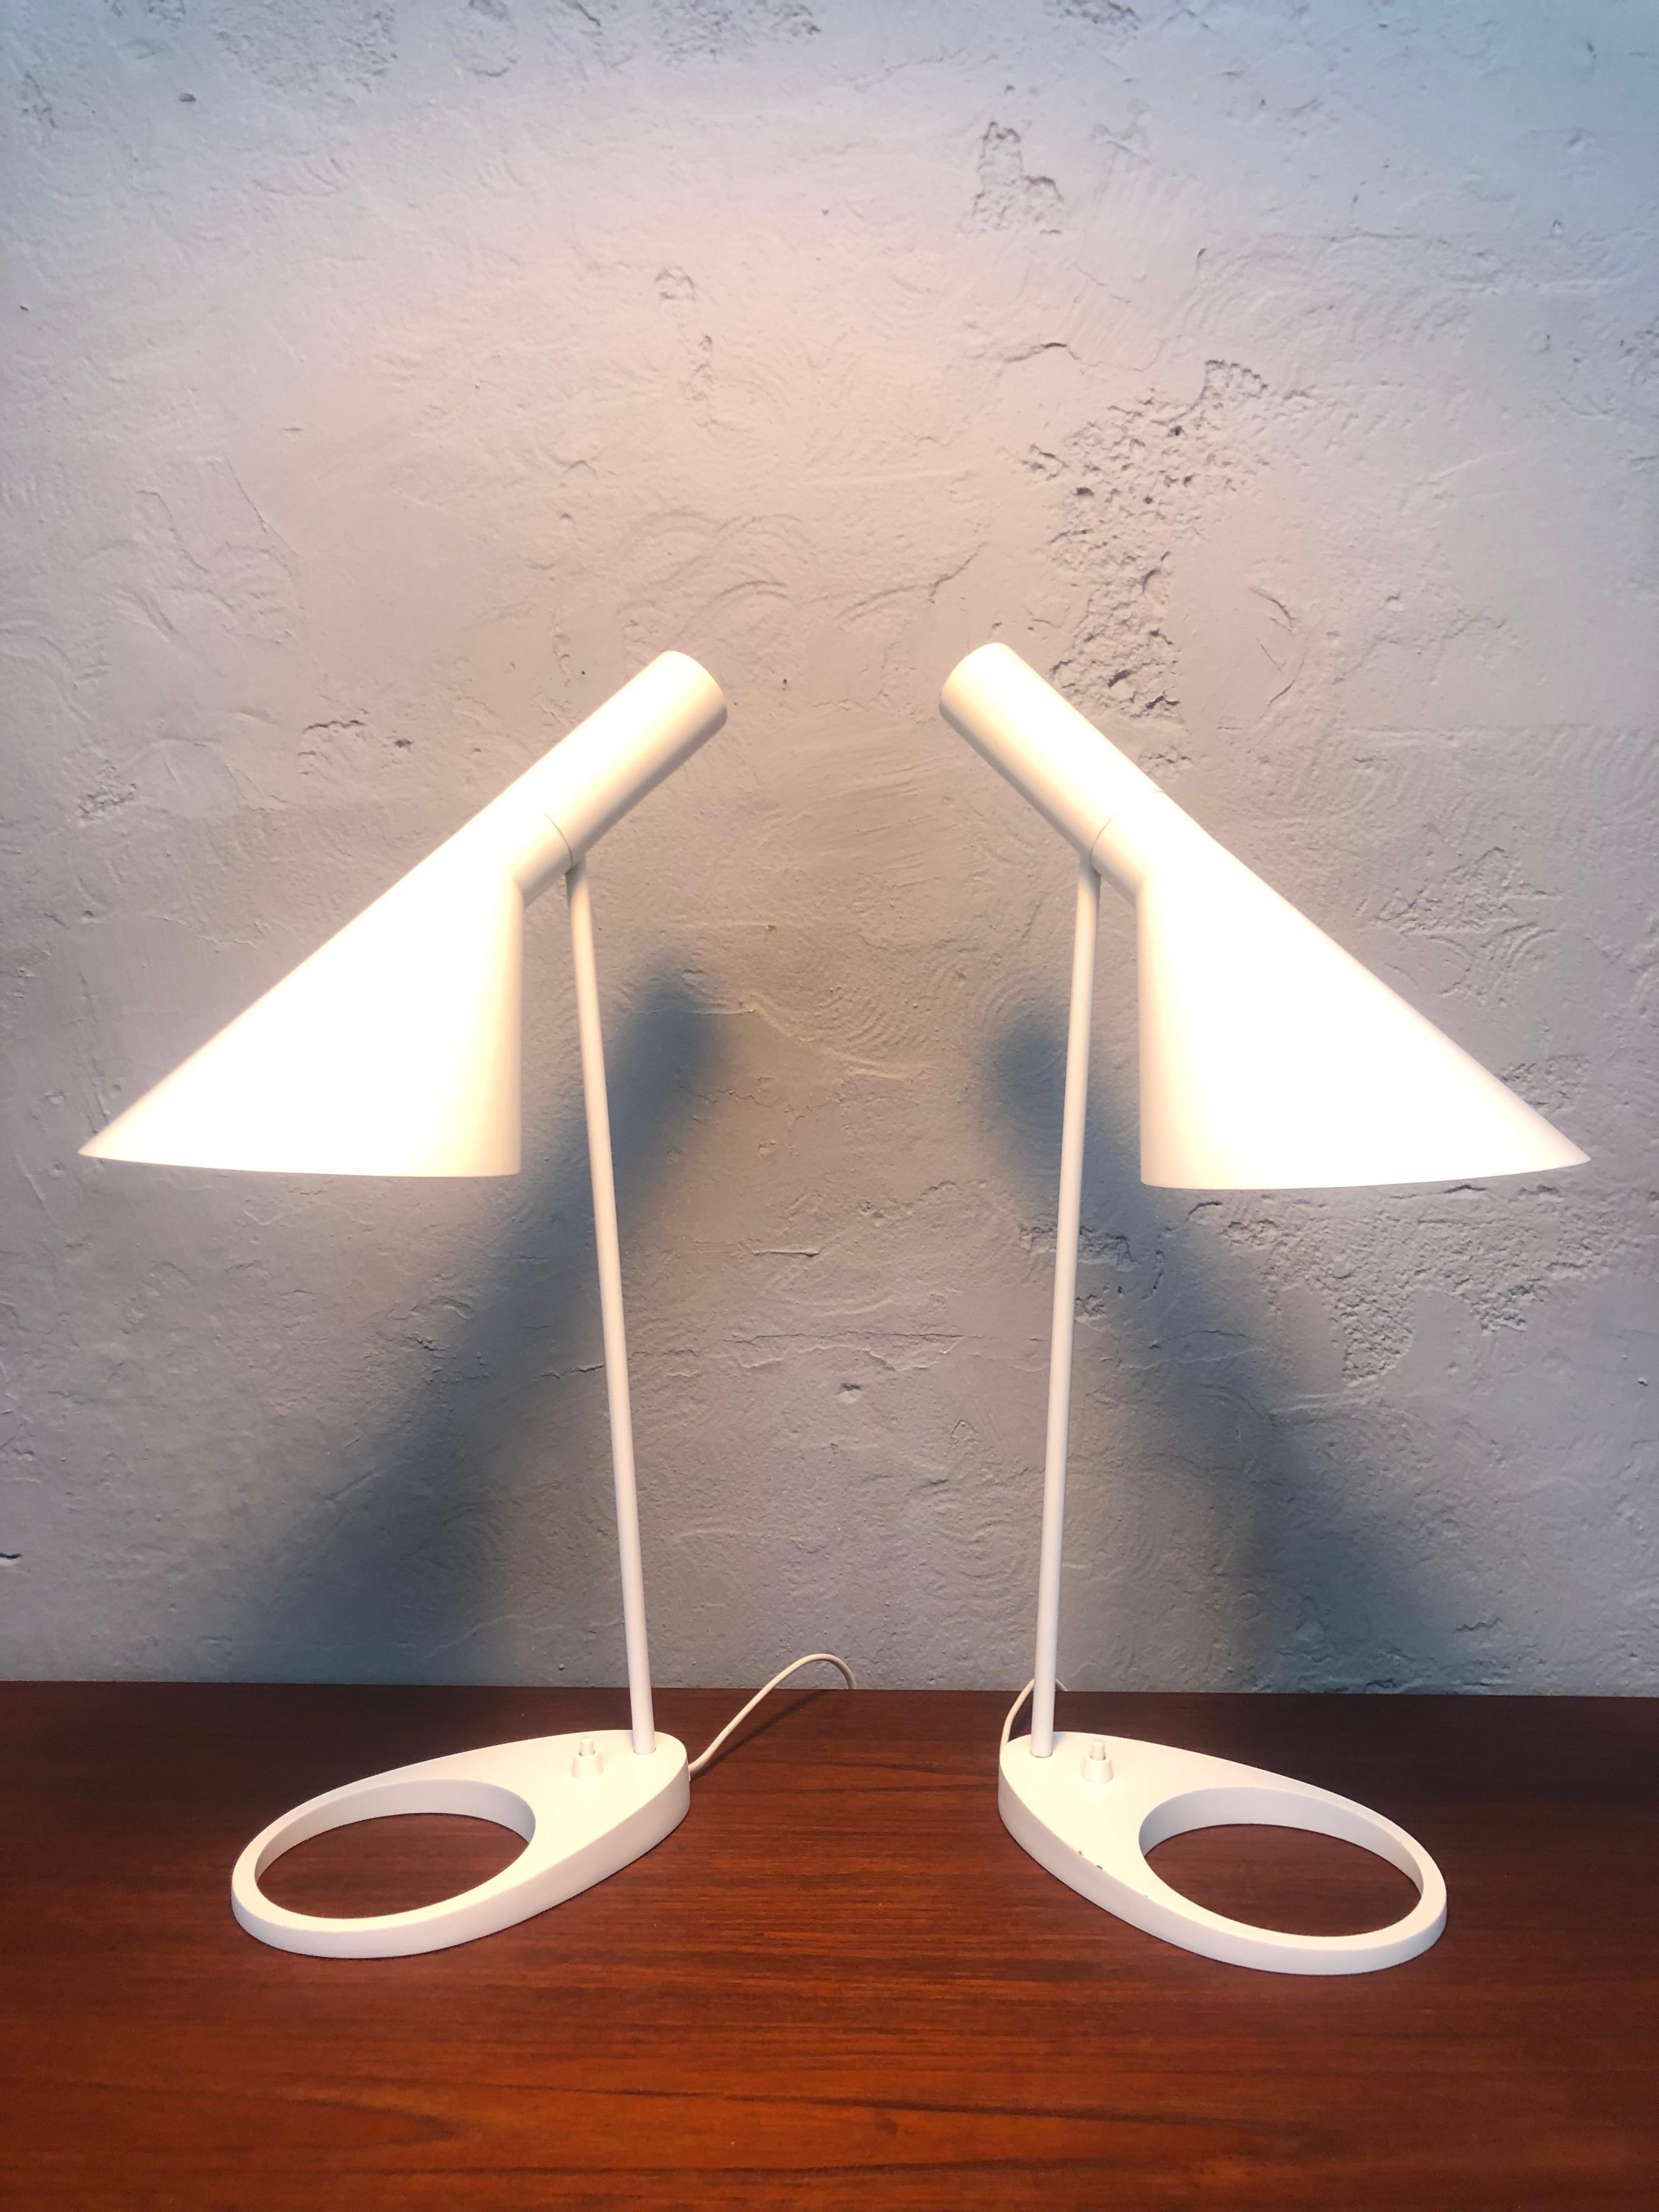 A Pair of iconic Arne Jacobsen table lamps in white from the 1980s. 
This iconic lamp was designed by Jacobsen in 1957 for the worlds first designer hotel in Copenhagen. 
All of the items designed for this project have become design icons such as